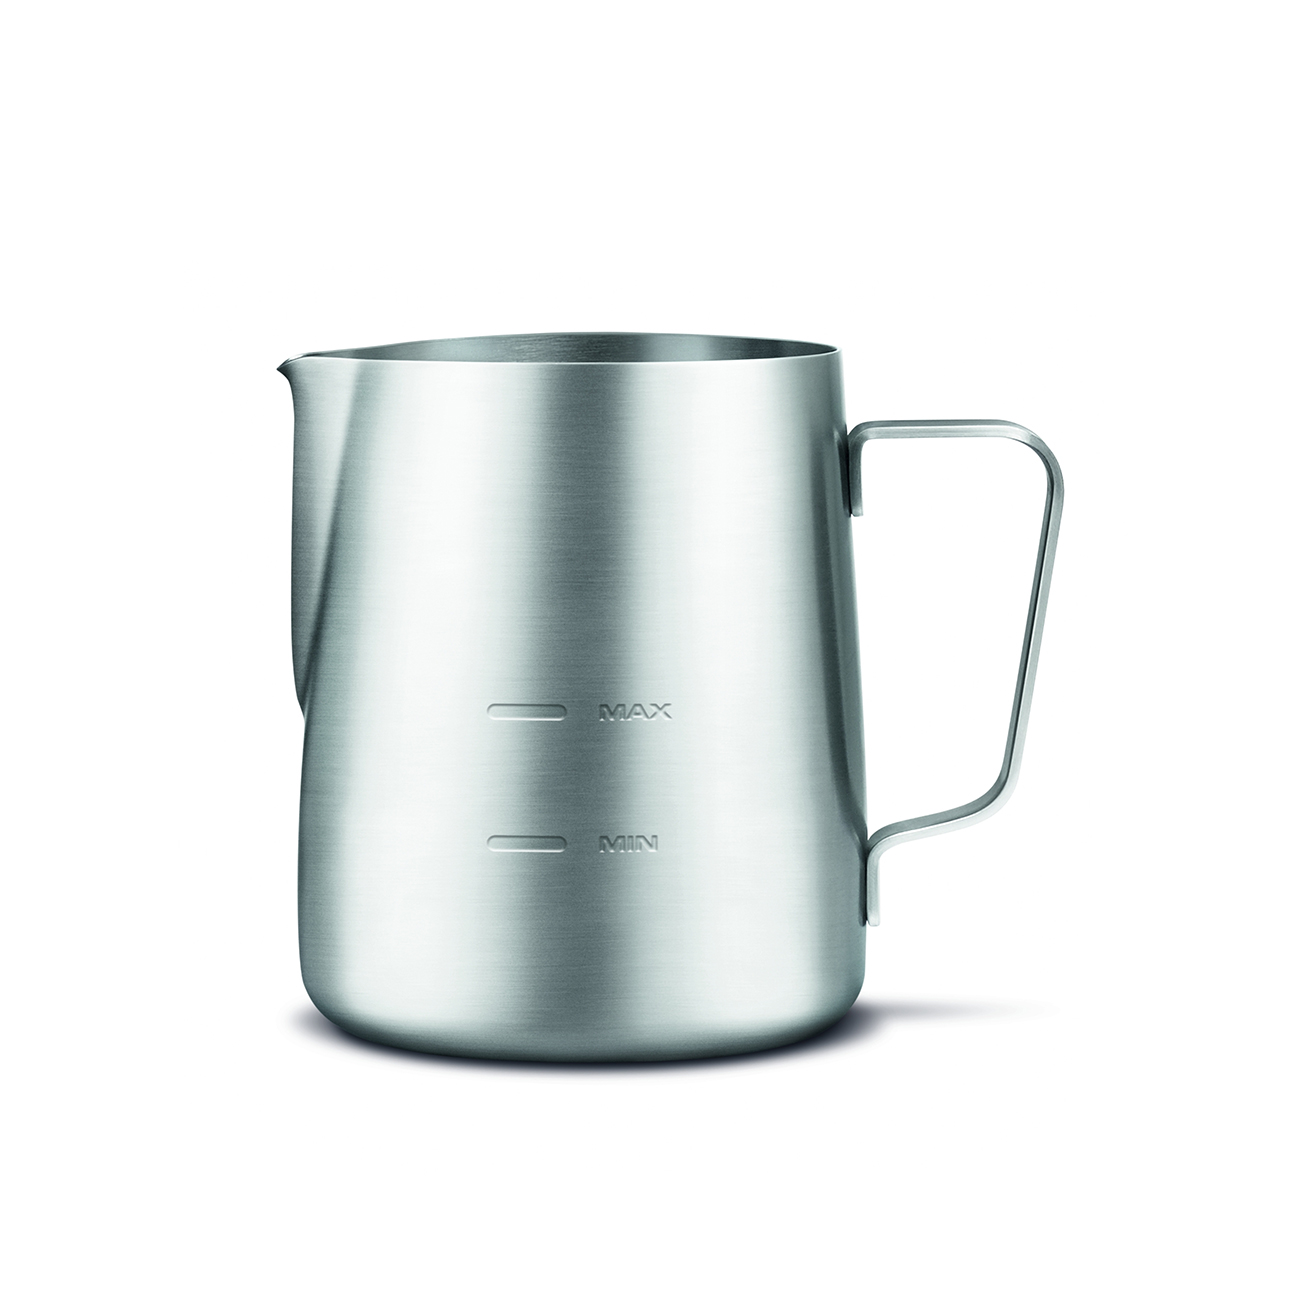 Breville Stainless Steel Creamer Jug Milk Frothing Cup